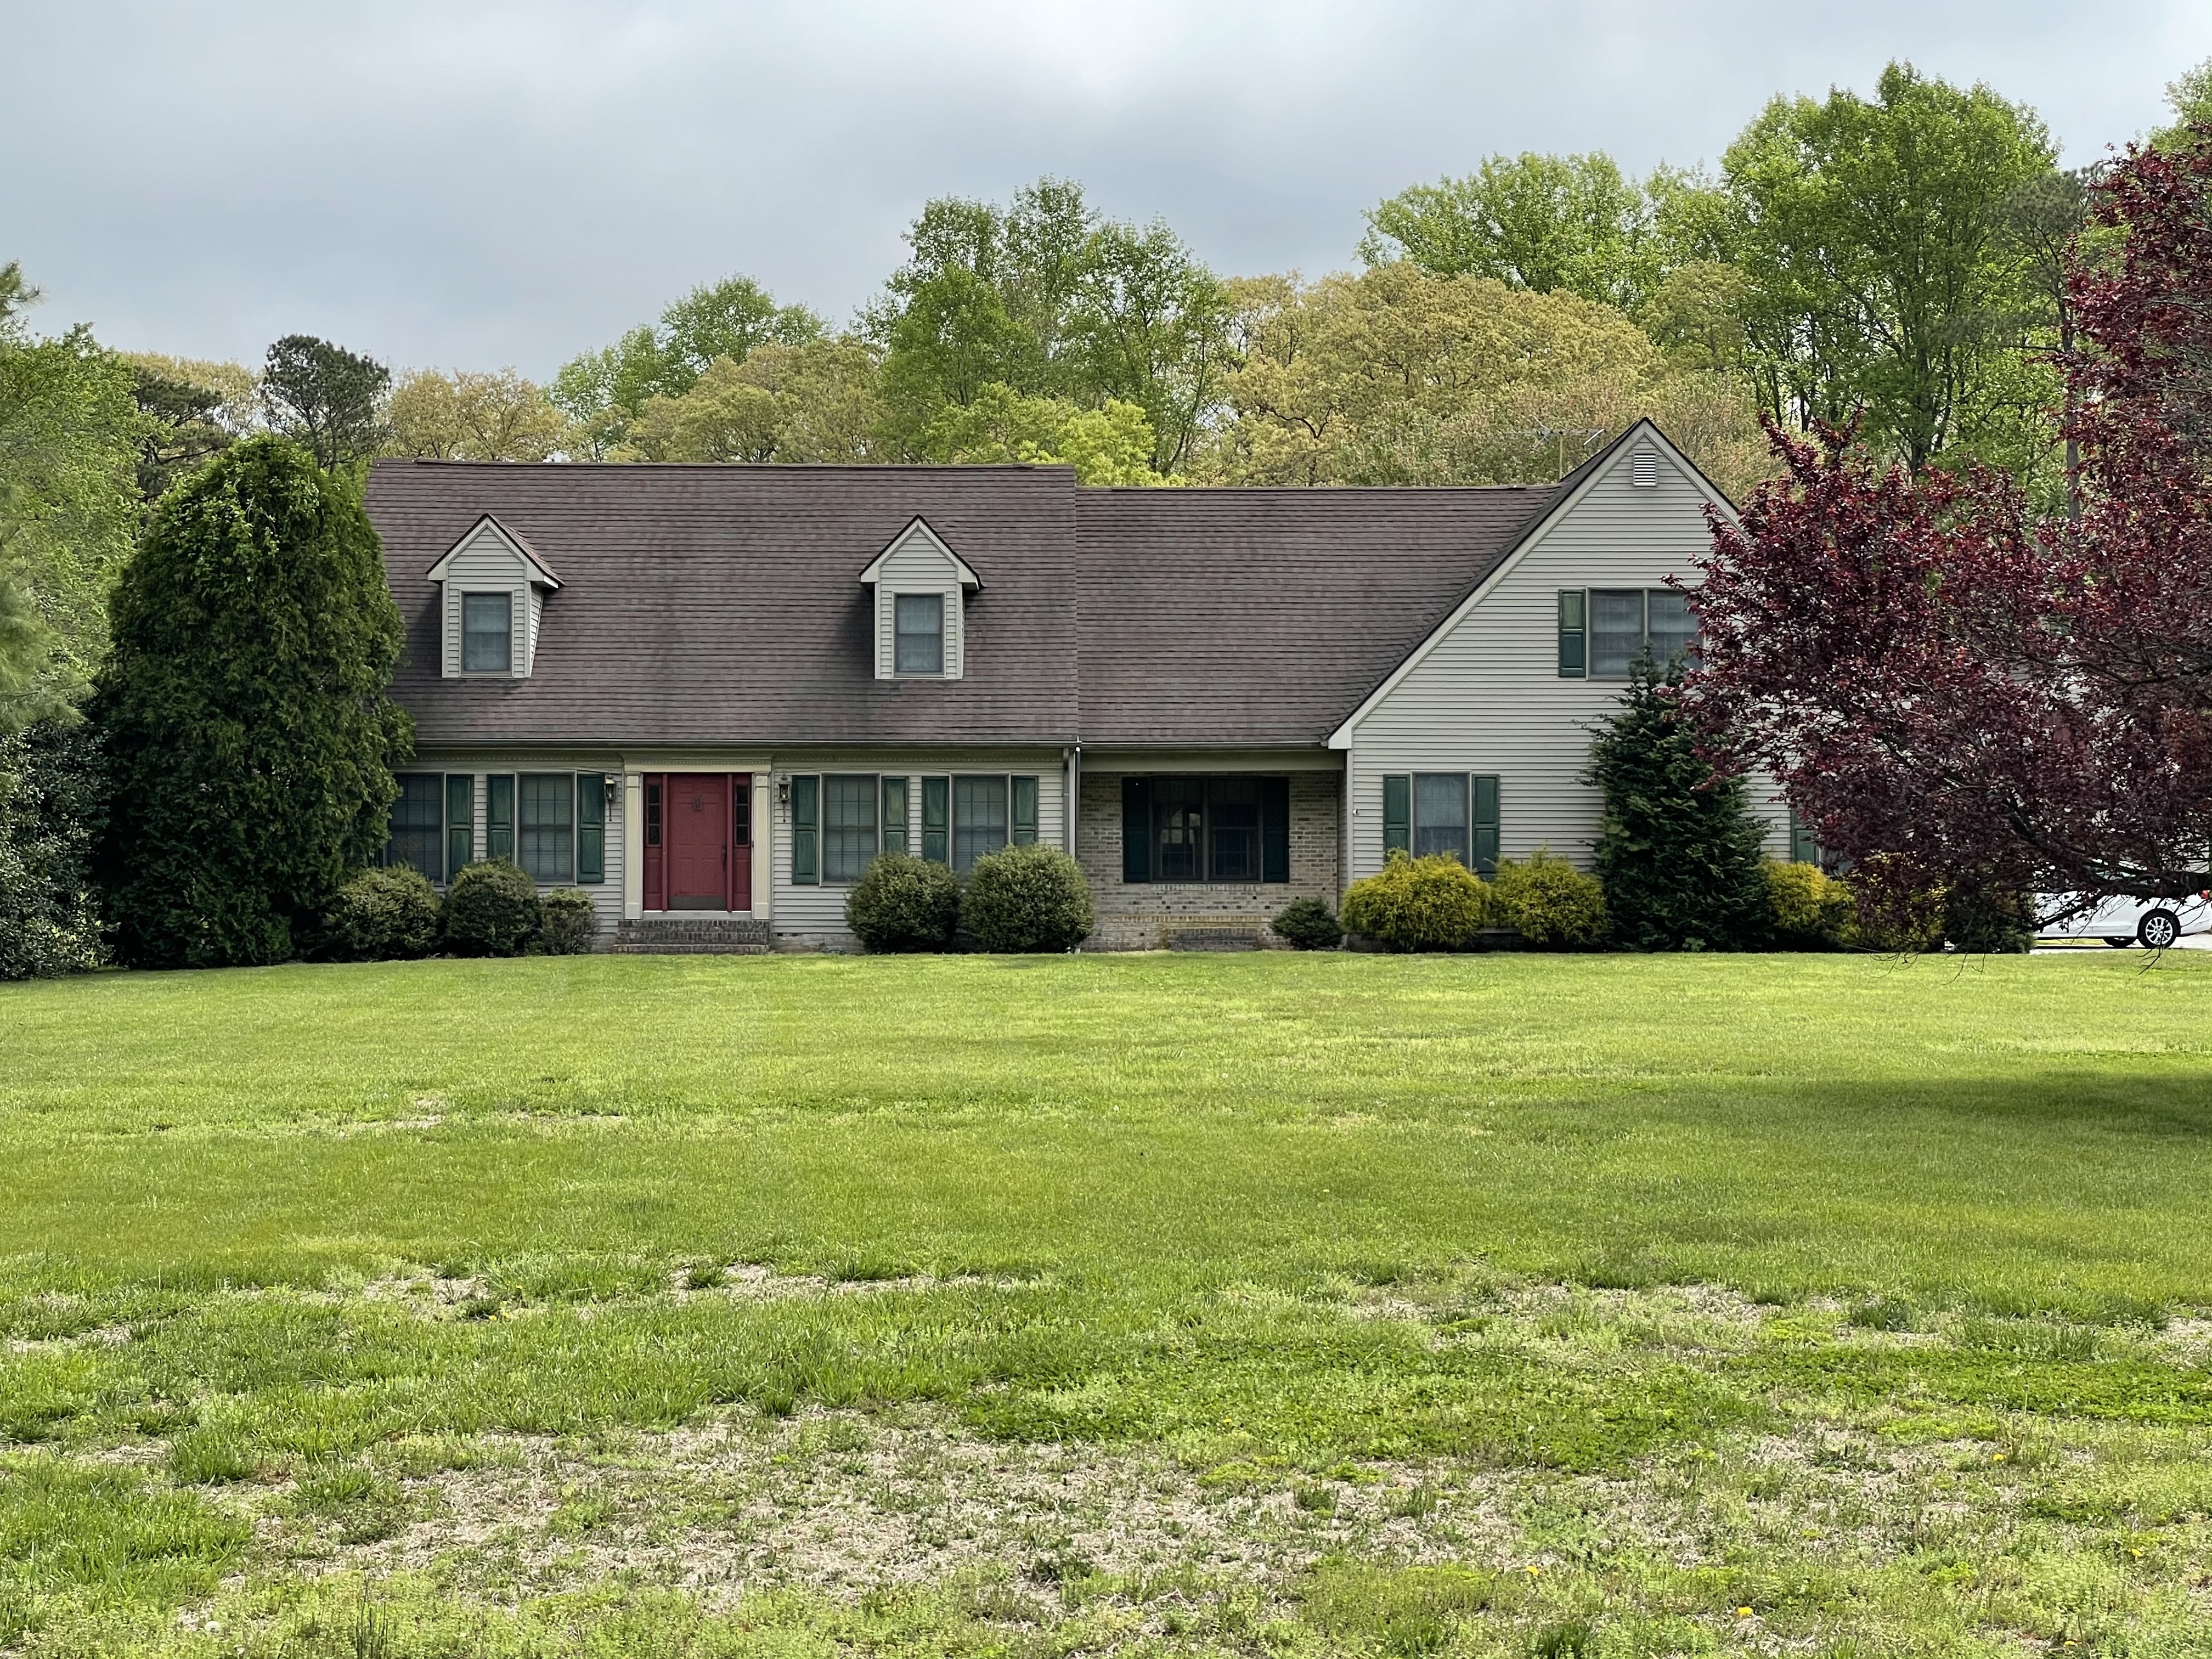 23175_Peterkins_Rd PRICE RECENTLY REDUCED: CAPE COD ON 3.7 ACRES! - Jack Lingo REALTOR